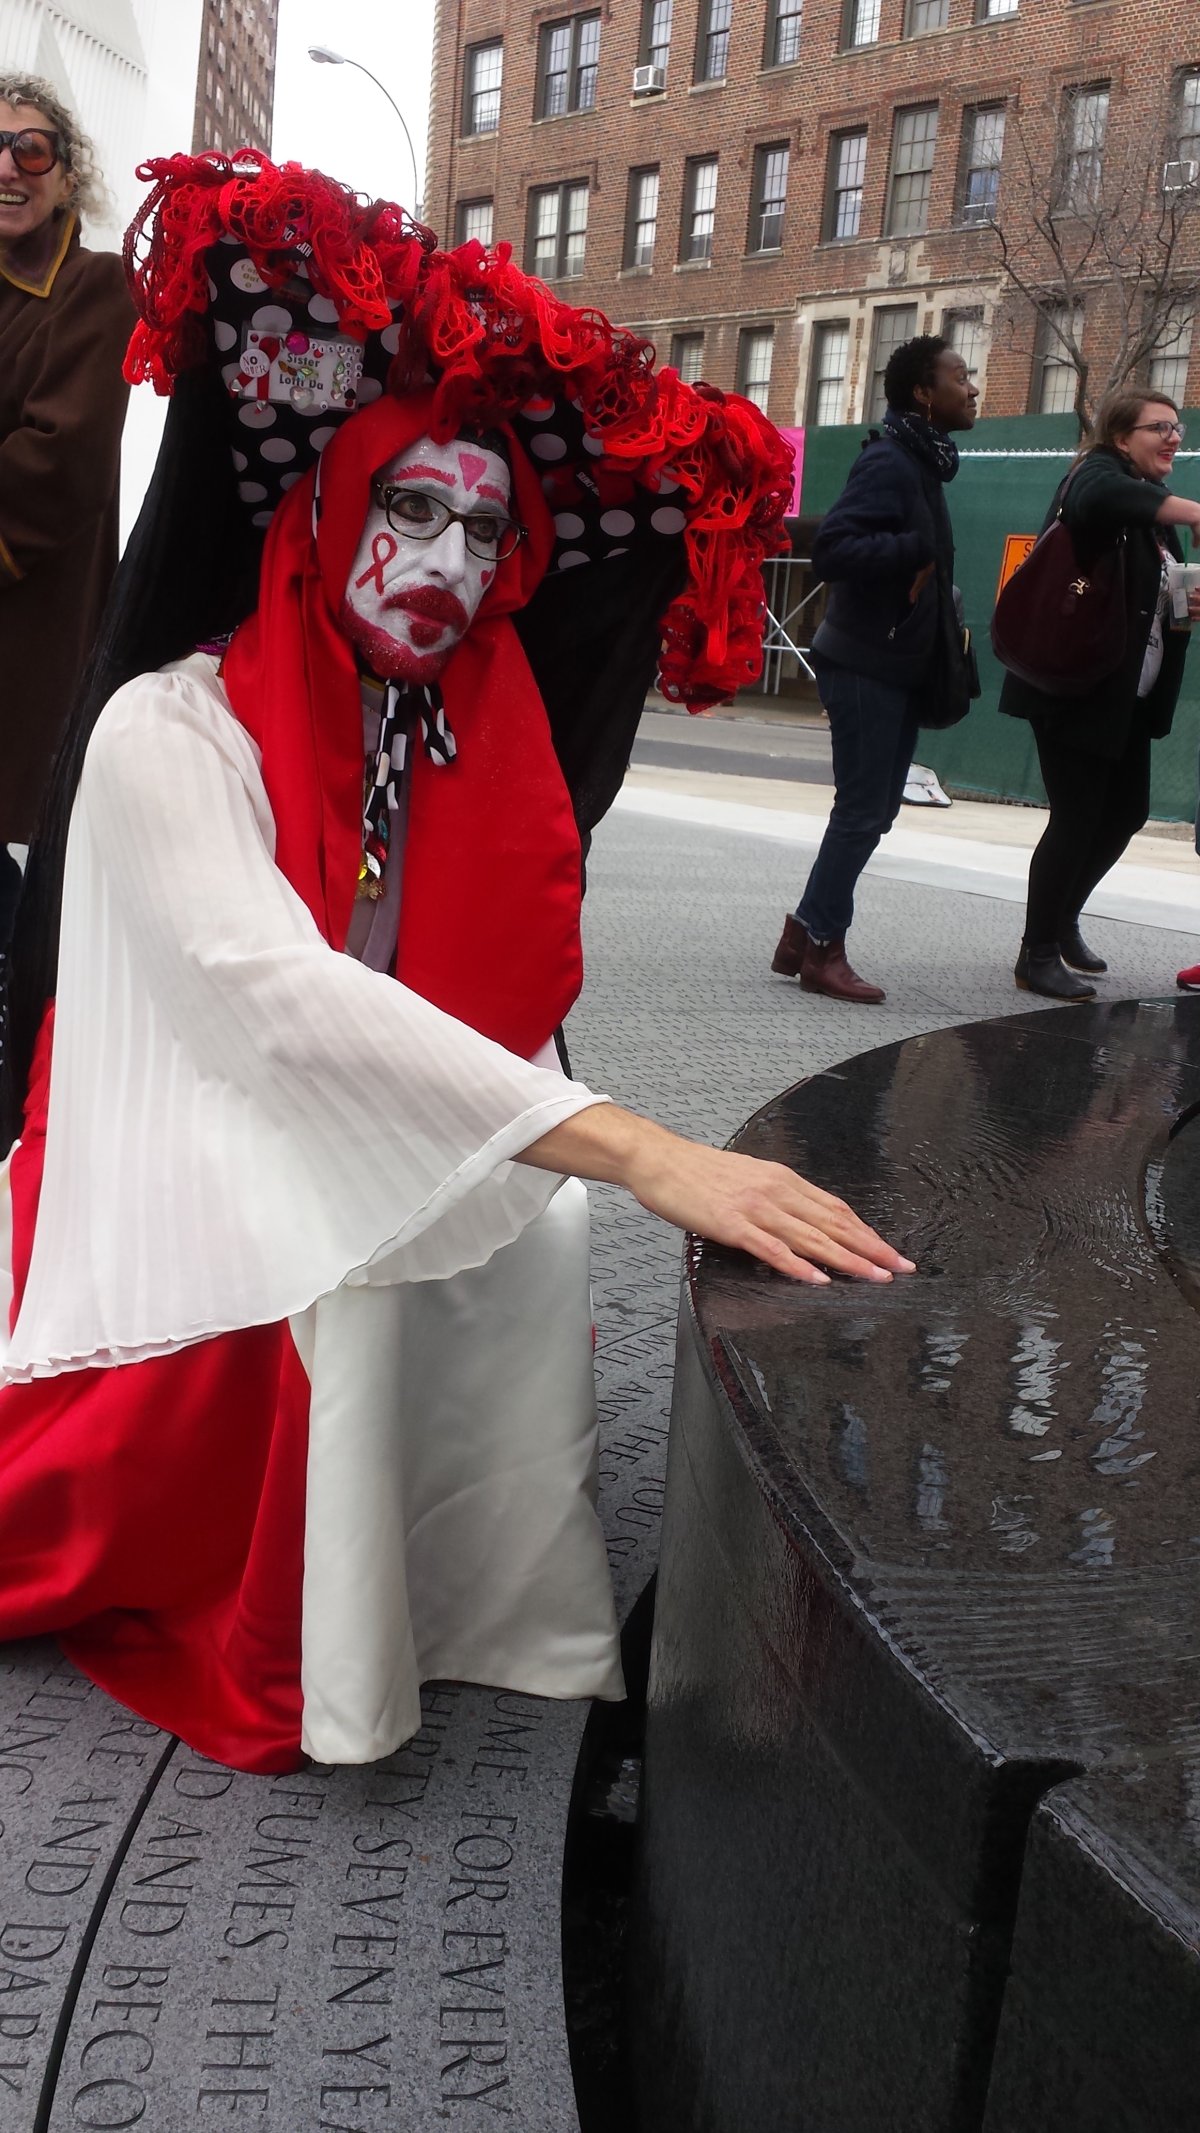 Sister Lotti Da of the Sisters of Perpetual Indulgence, from Windsor Terrace, Brooklyn, touched the water in the small circular fountain underneath the AIDS Memorial trellis at the dedication last week. One part of the memorial that is a little challenging is the ground treatment, which is a pastiche of phrases from Walt Whitman’s famous poem “Song of Myself.” Basically, the ground etching is so densely packed with phrases that it’s completely impossible to read — or even look at for long! But Lotti Da, looking on the bright side, said he was now inspired to go home and actually read the poem. So that’s something! Photo by Scoopy